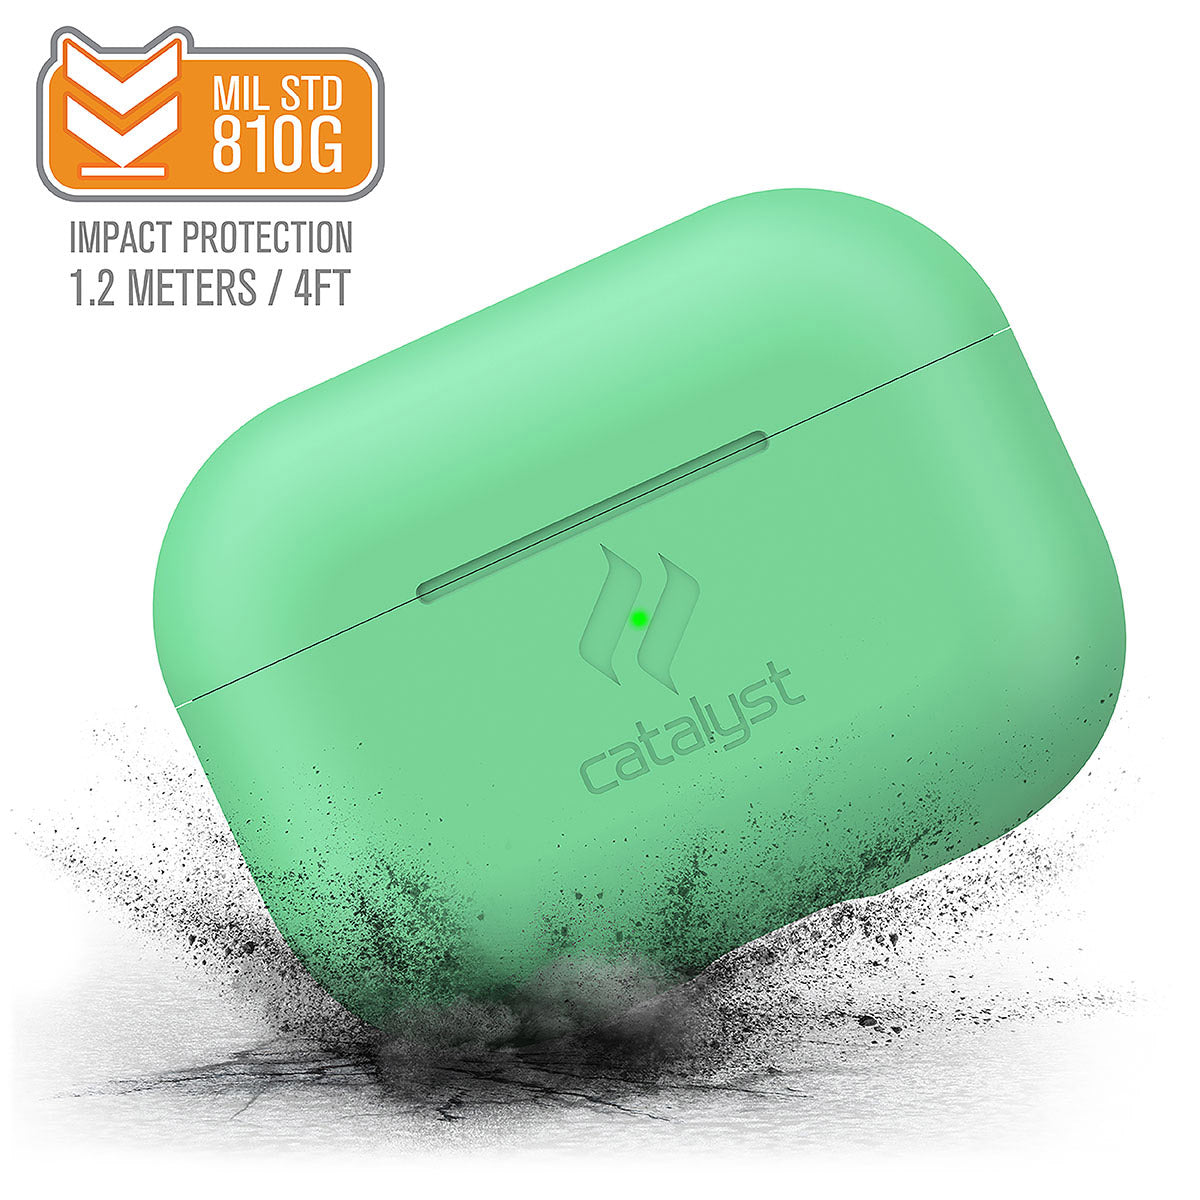 Catalyst airpods pro gen 2/1 slim case showing how drop proof the case is in a mint green colorway text reads MIL STD 810G impact protection 1.2 meters/4FT